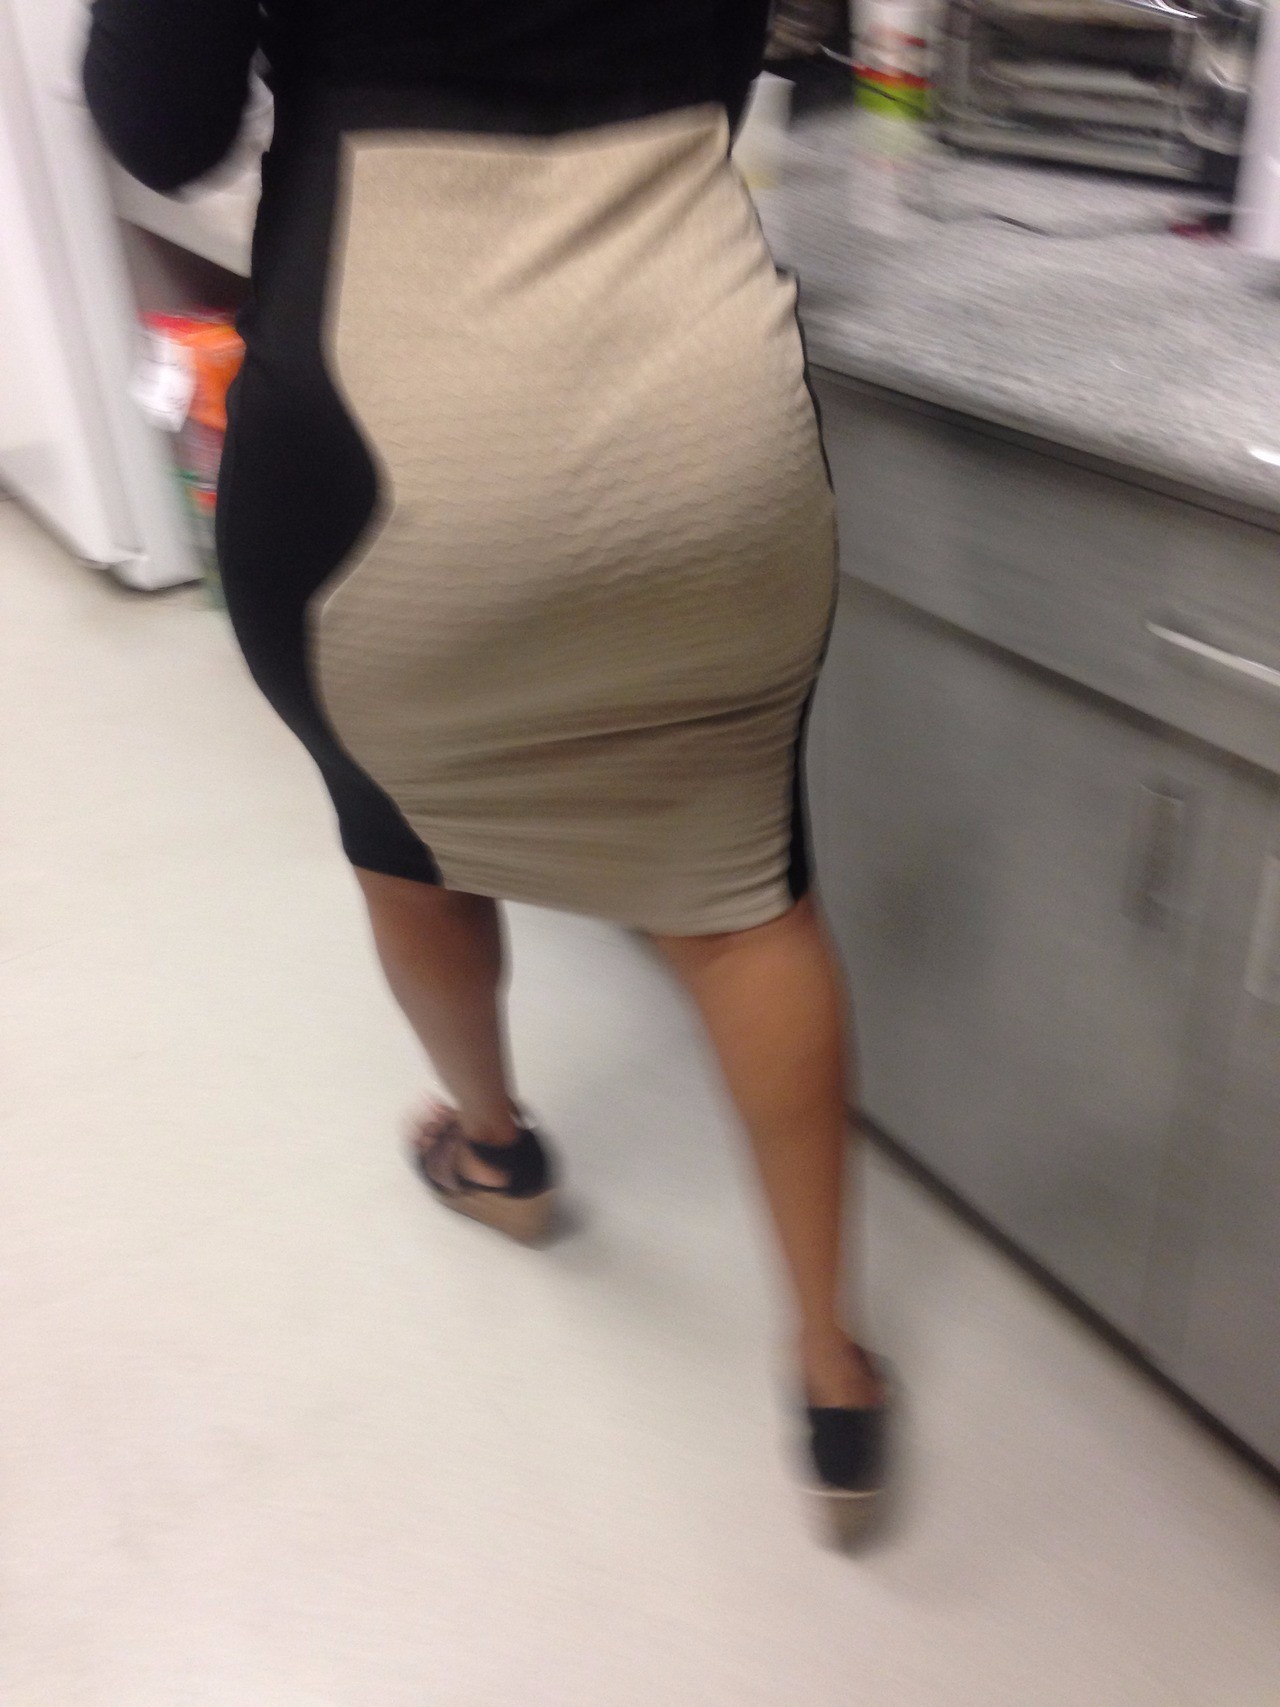 Amazing Phat Booty Coworker